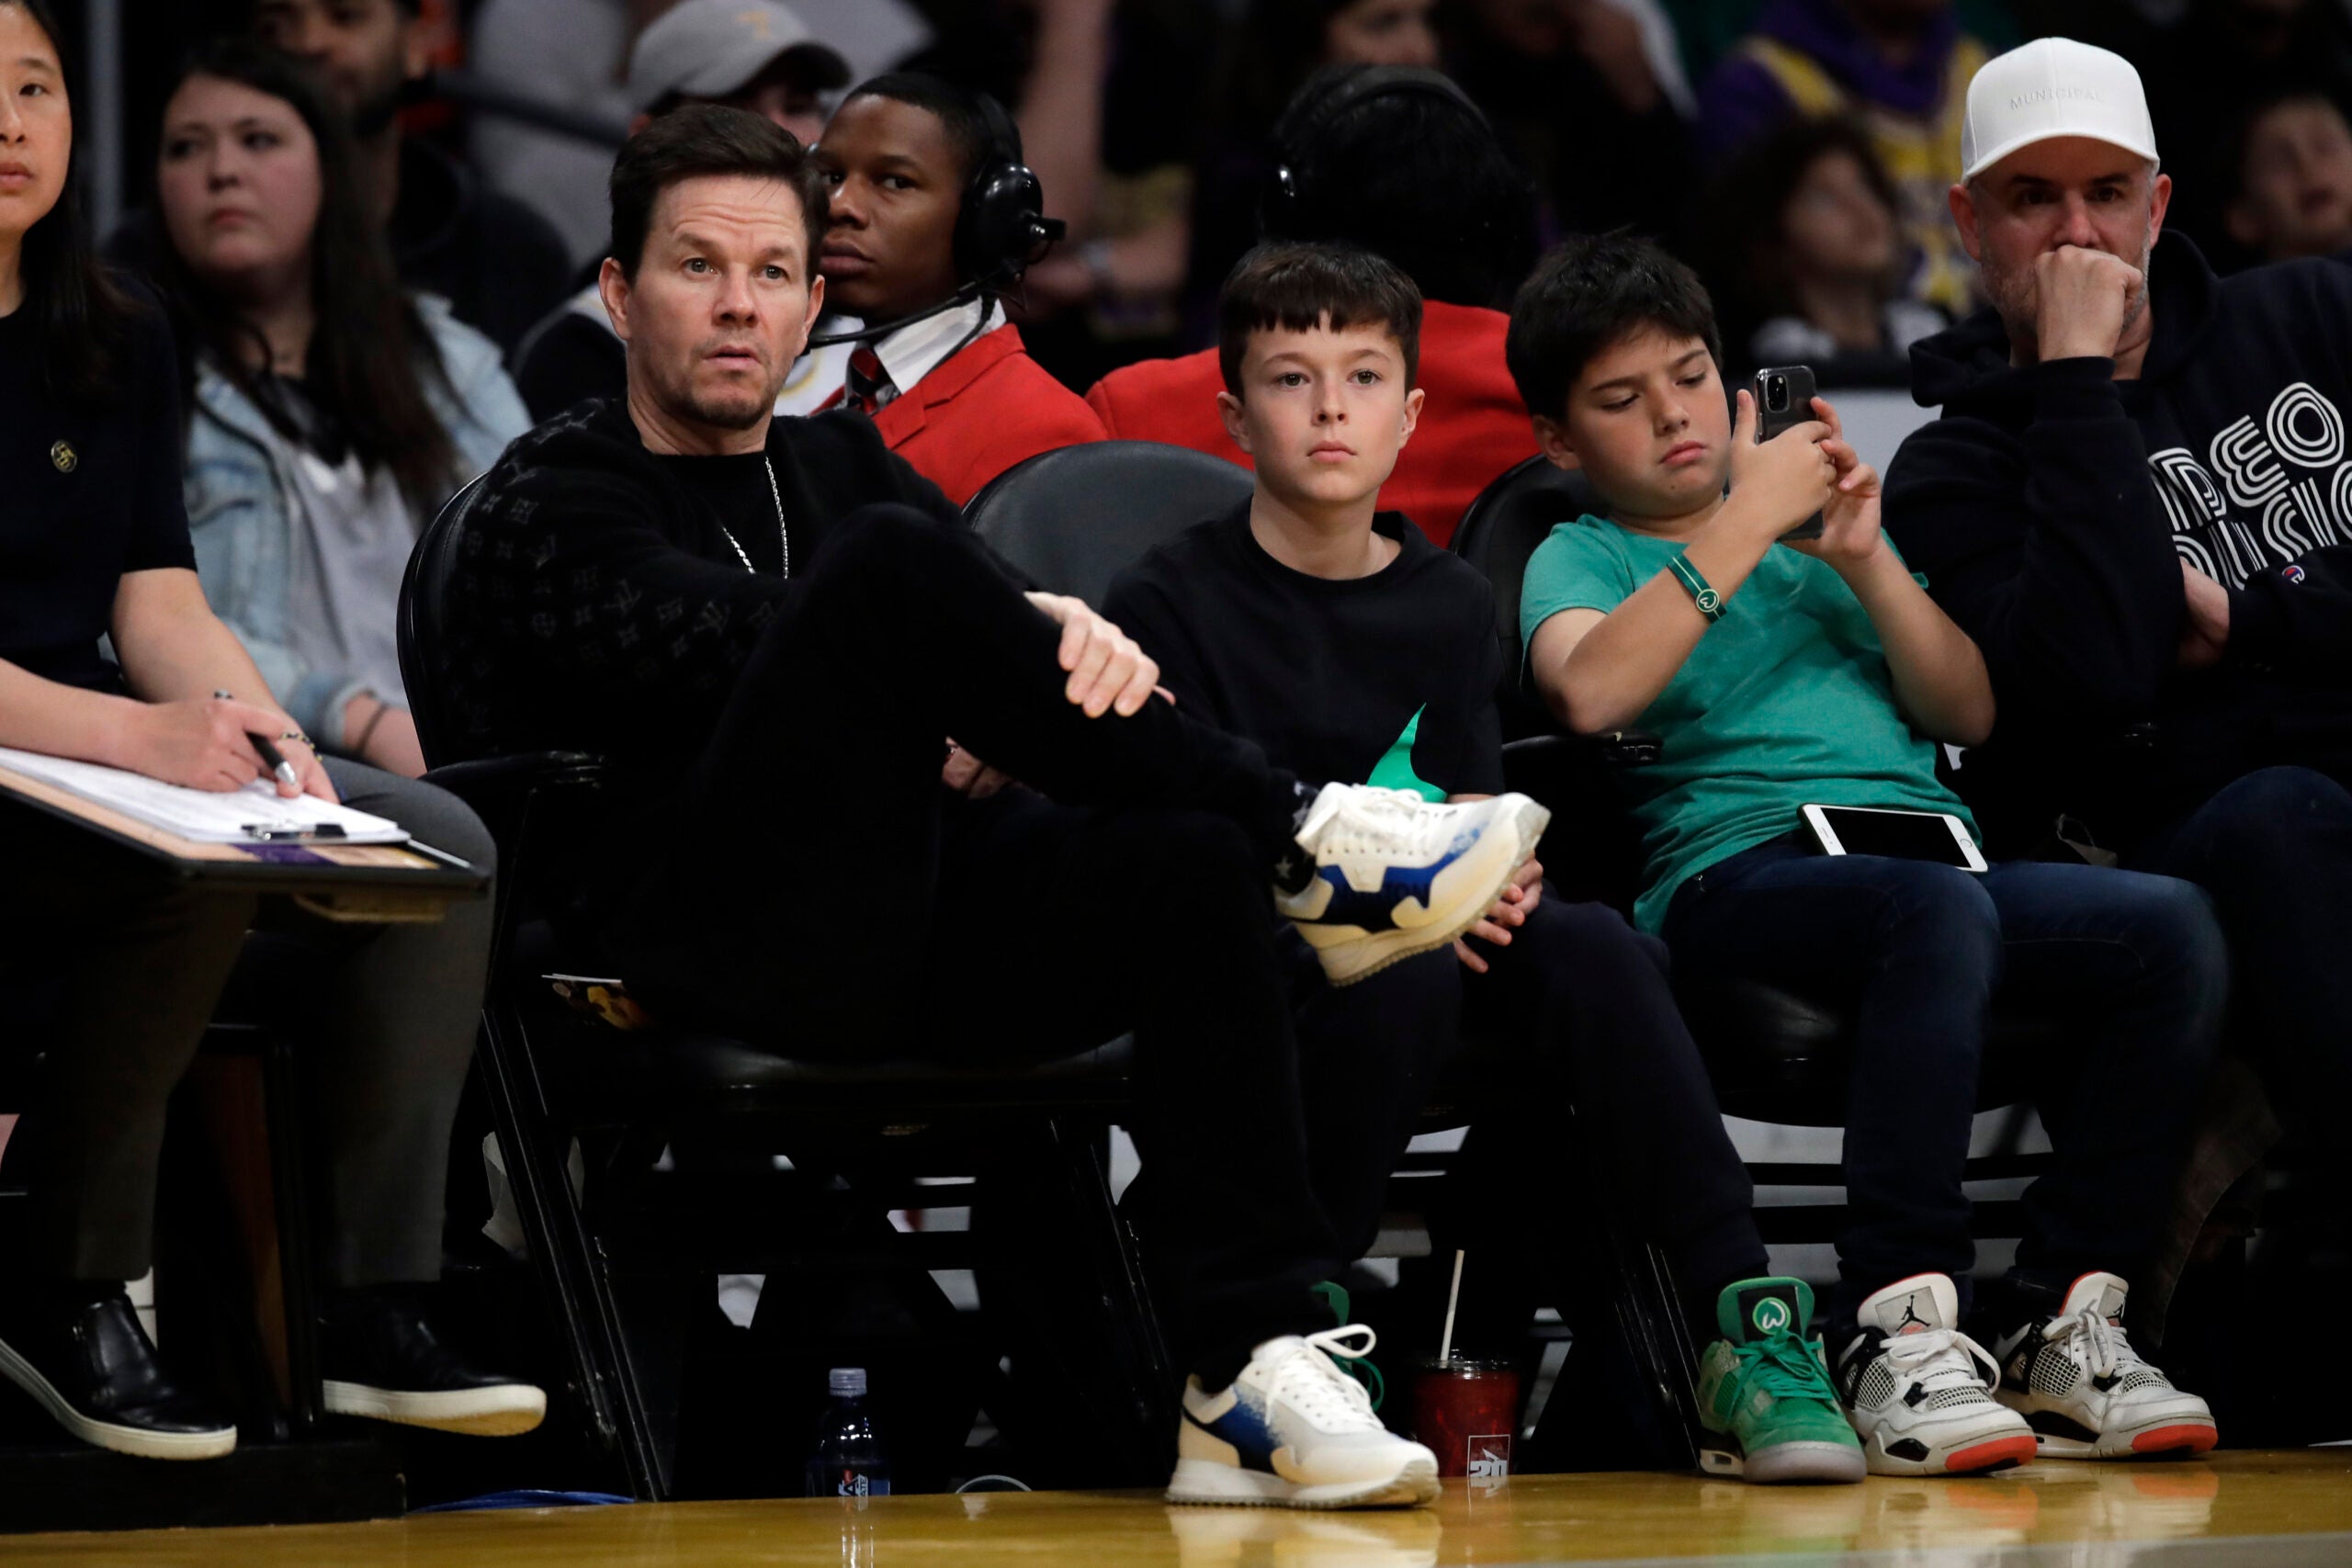 Wahlburgers sneakers at Celtics game